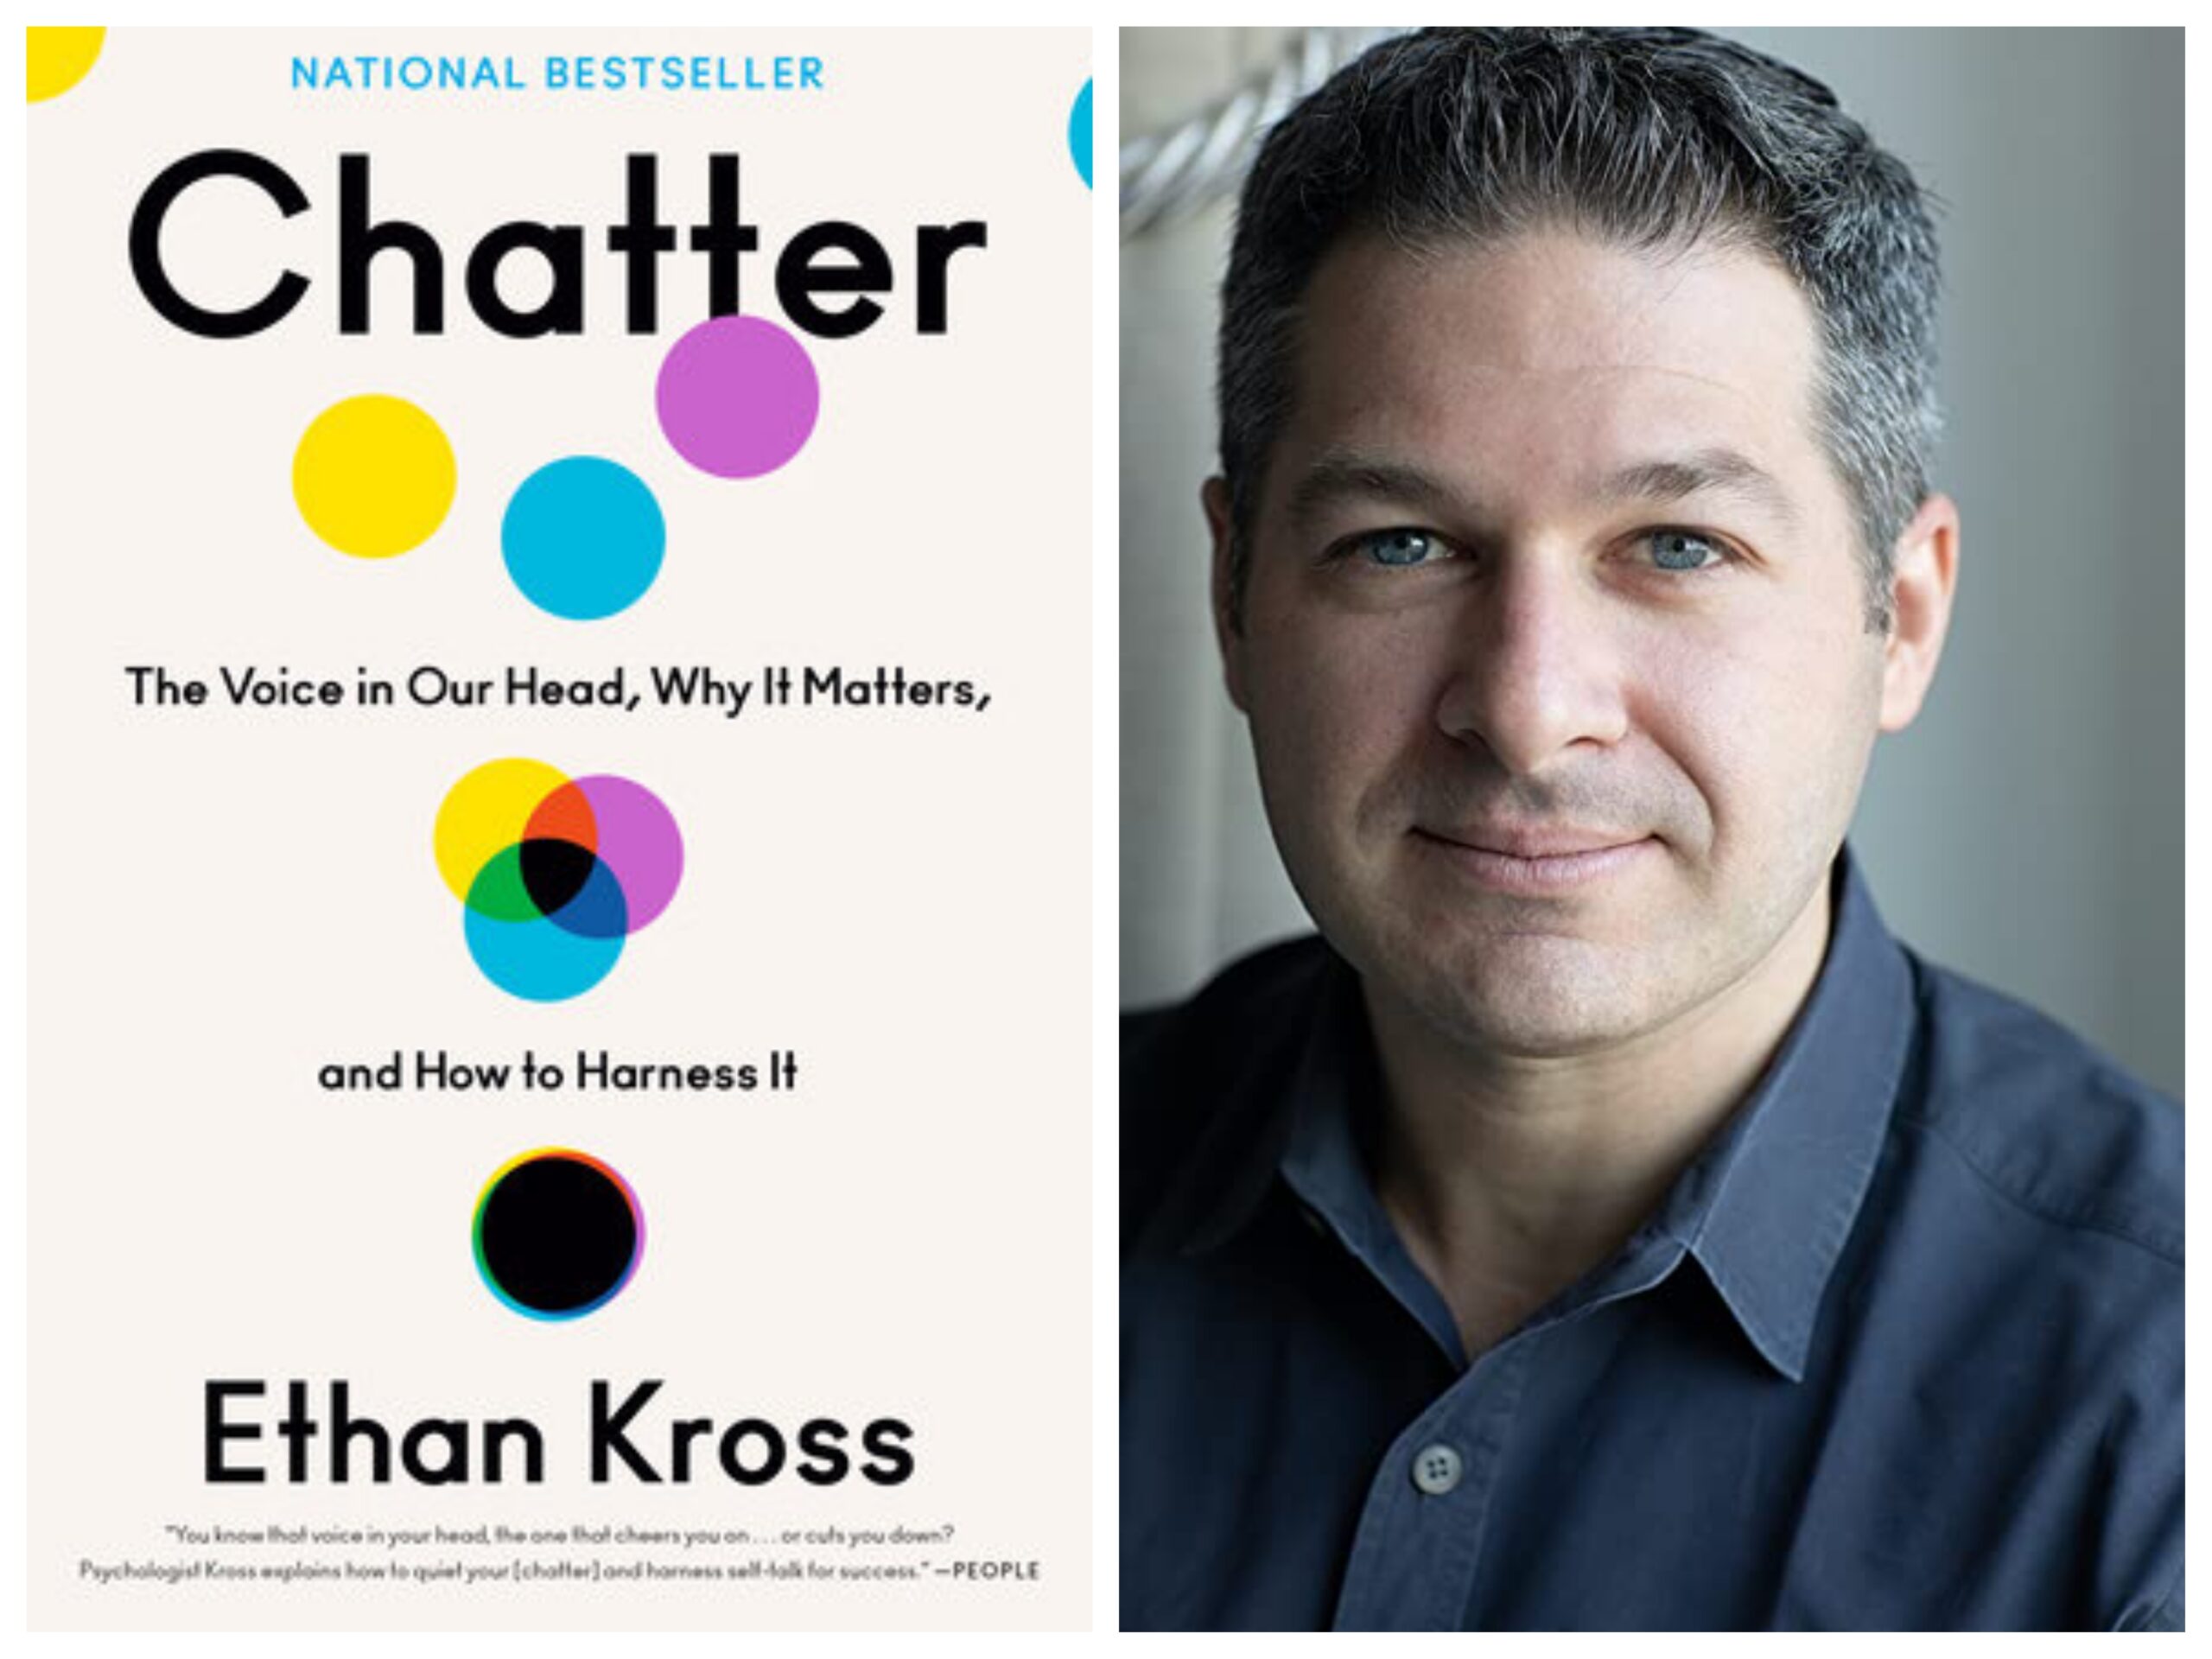 Psychologist and author Ethan Kross with the cover of his book, "Chatter: The Voice in Our Head, Why It Matters and How to Harness It."